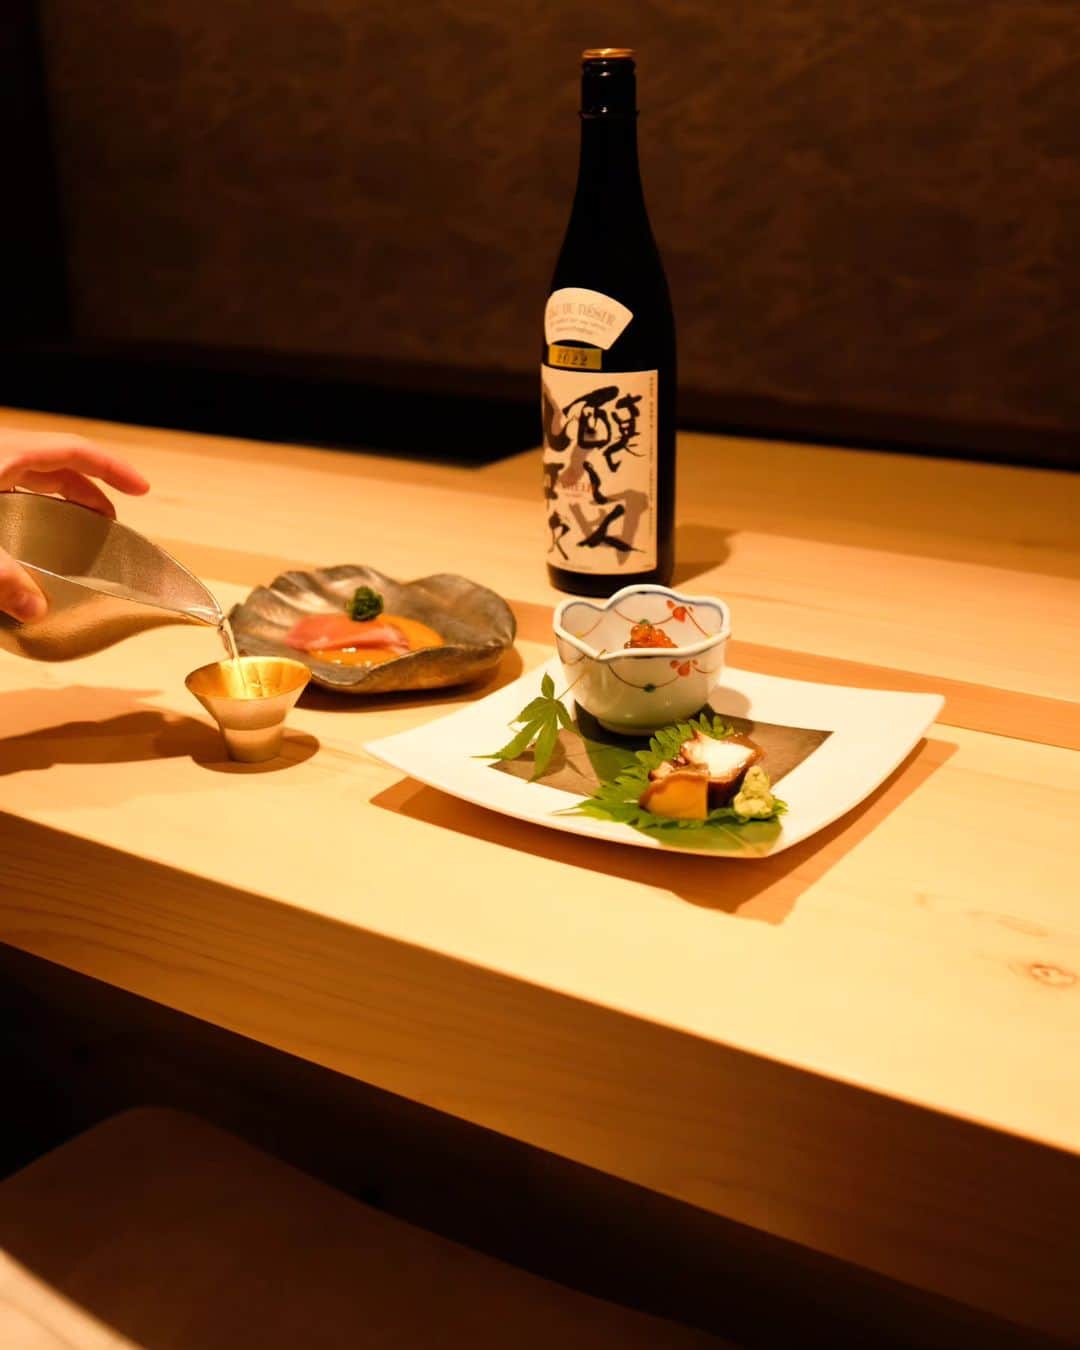 Sushi Azabuのインスタグラム：「Whether you're a sake novice or a seasoned connoisseur looking for something new, we've got you covered. Let us be your guide through our exquisite sake menu to pair with your dinner 🍶  Azabu New York @azabunewyork Open Tuesday - Sunday 5:00PM - 10:00PM azabuglobal.com/new-york」